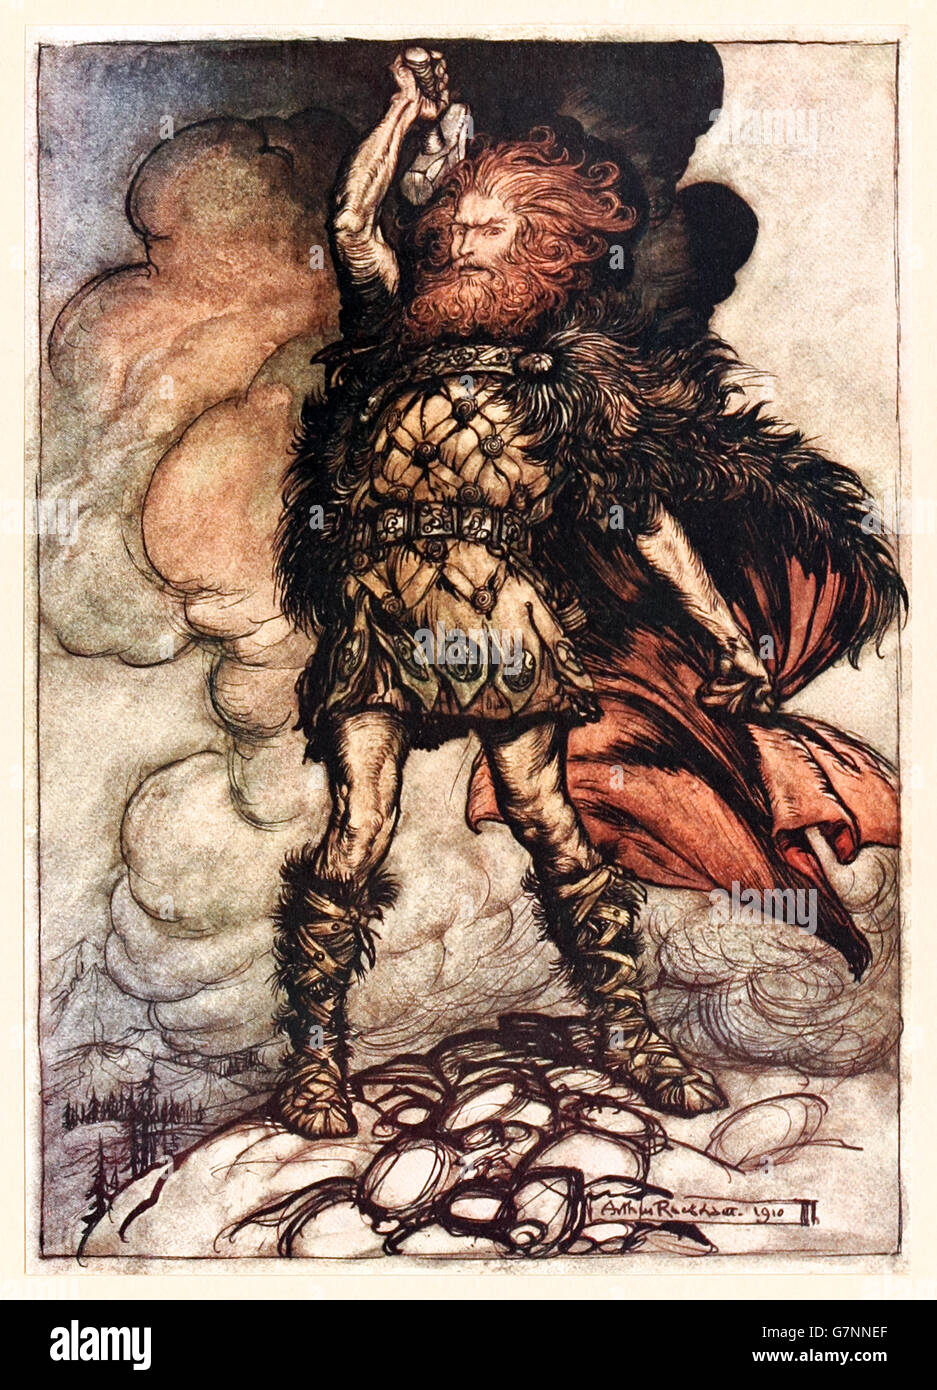 “To my hammer’s swing Hitherward sweep Vapours and fogs! Hovering mists! Donner, your lord, summons his hosts!”  from ‘The Rhinegold & the Valkyrie’ illustrated by Arthur Rackham (1867-1939), published in 1910. Donner summons a thunderstorm to clear the air for the gods crossing into their new home Valhalla. Stock Photo